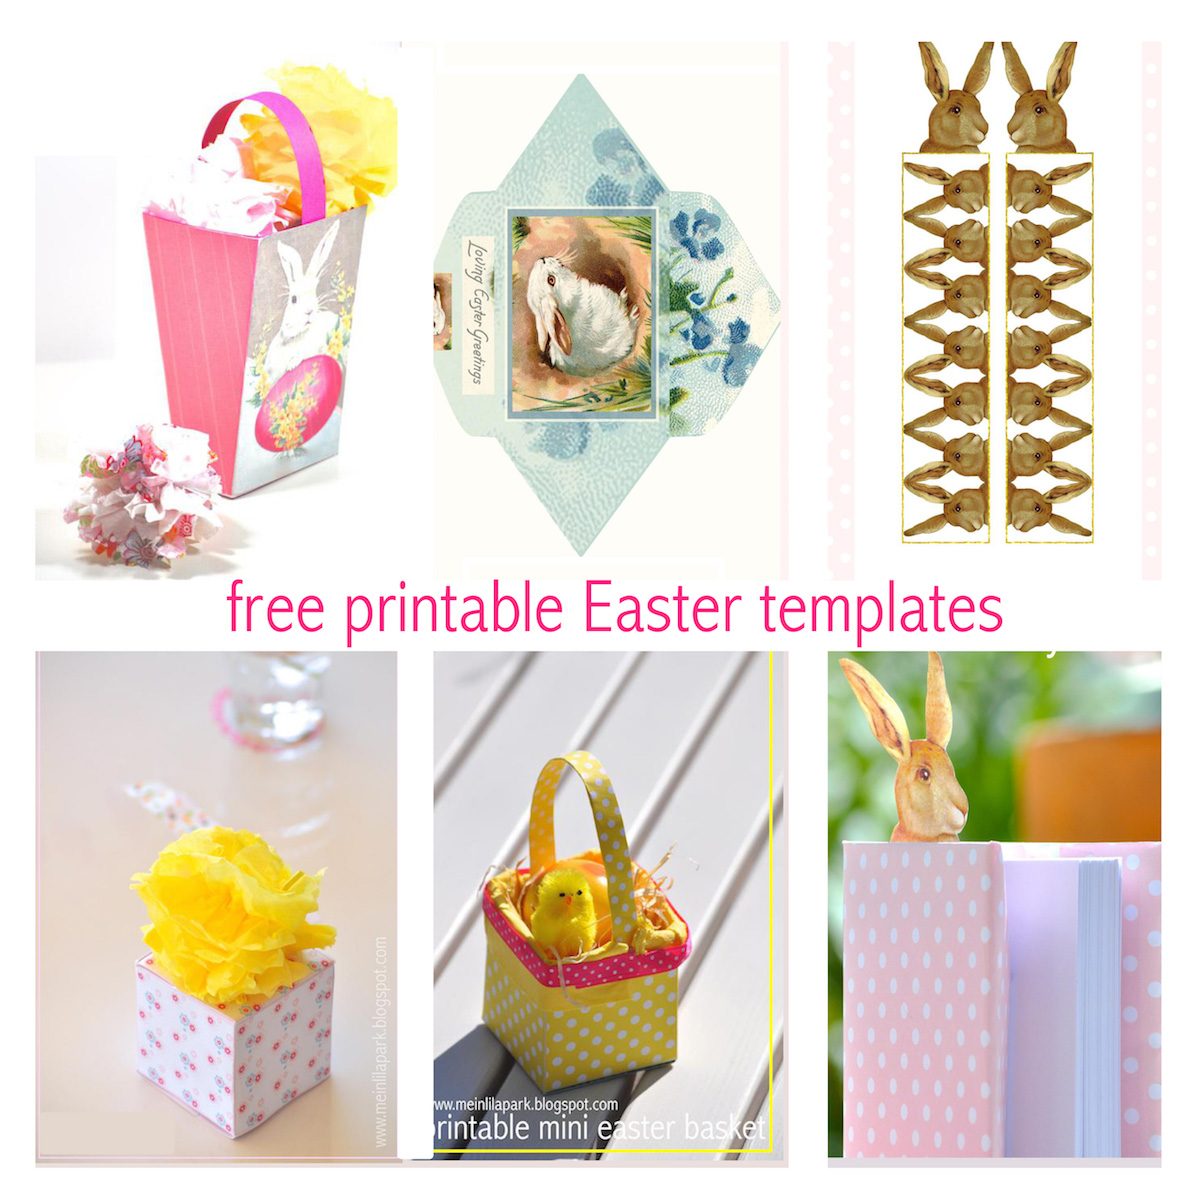 meinlilapark-10-free-printable-easter-box-and-diy-templates-round-up